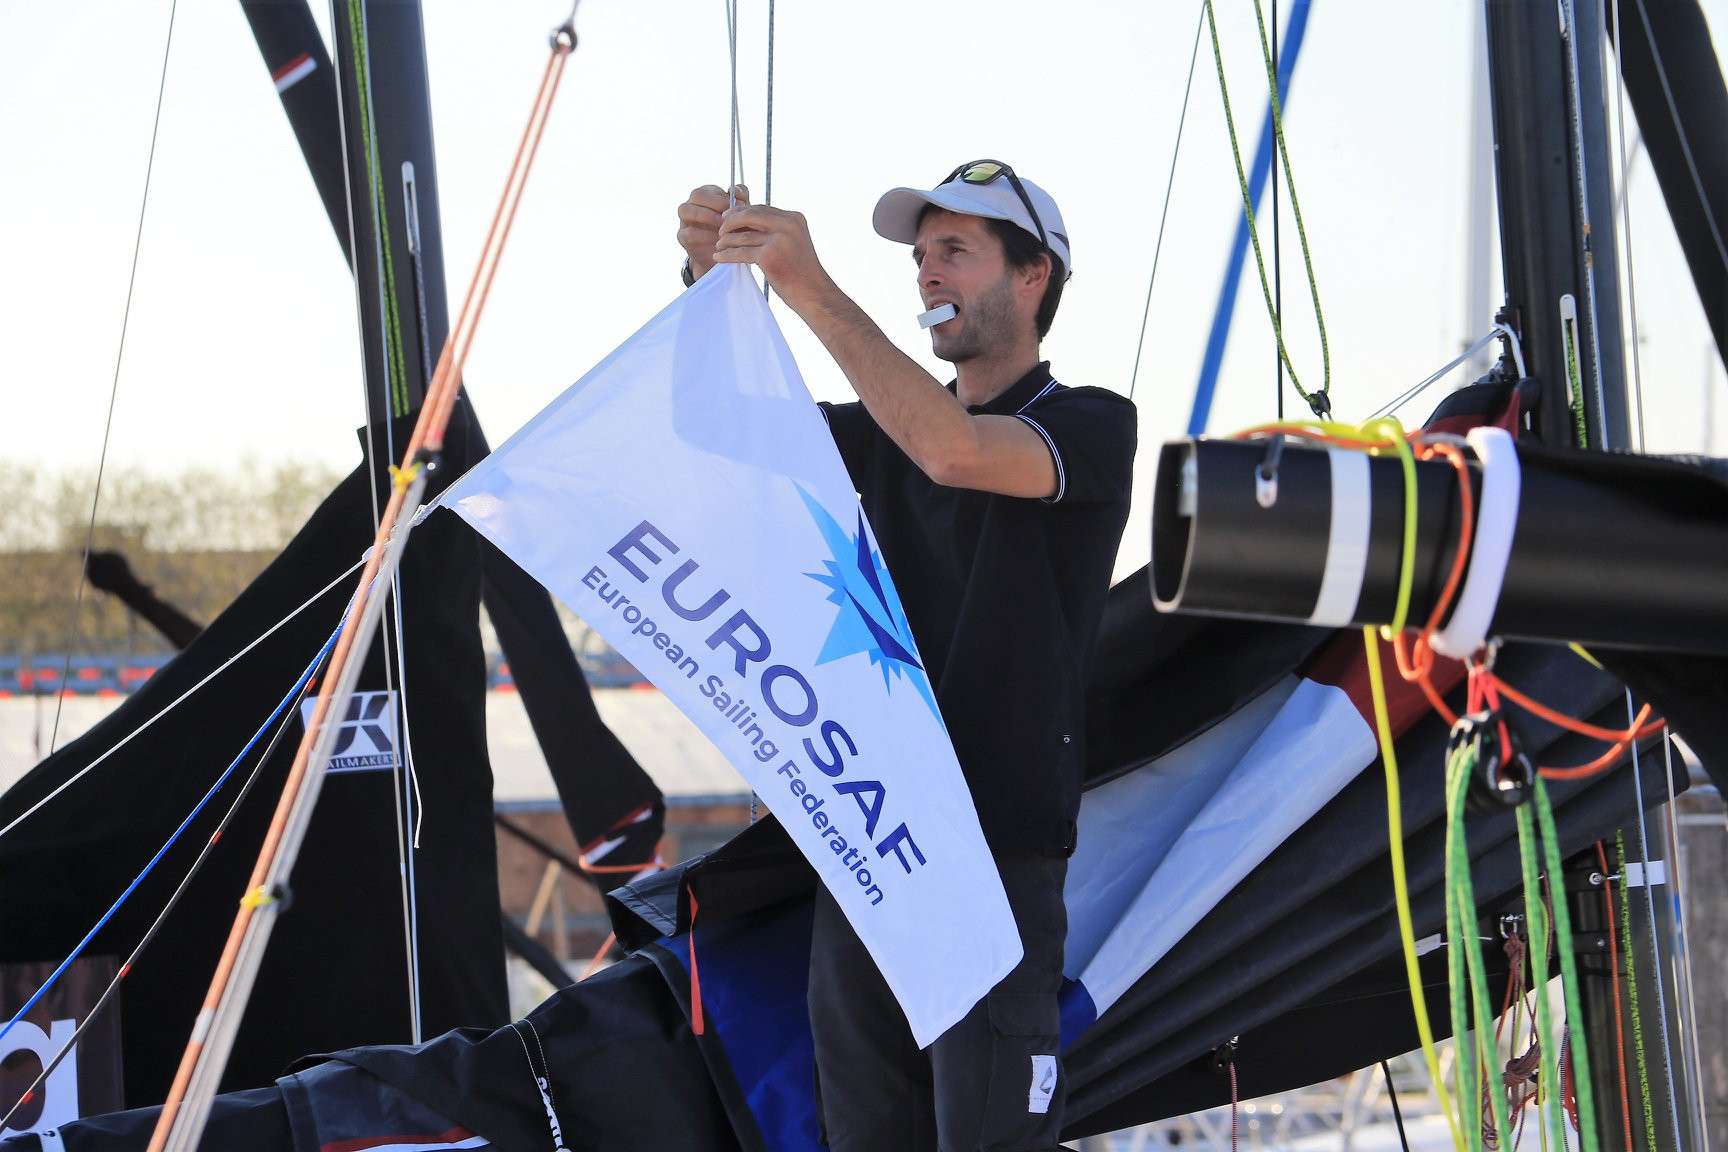 Weather forces postponement of EUROSAF Mixed Offshore European Championship opener